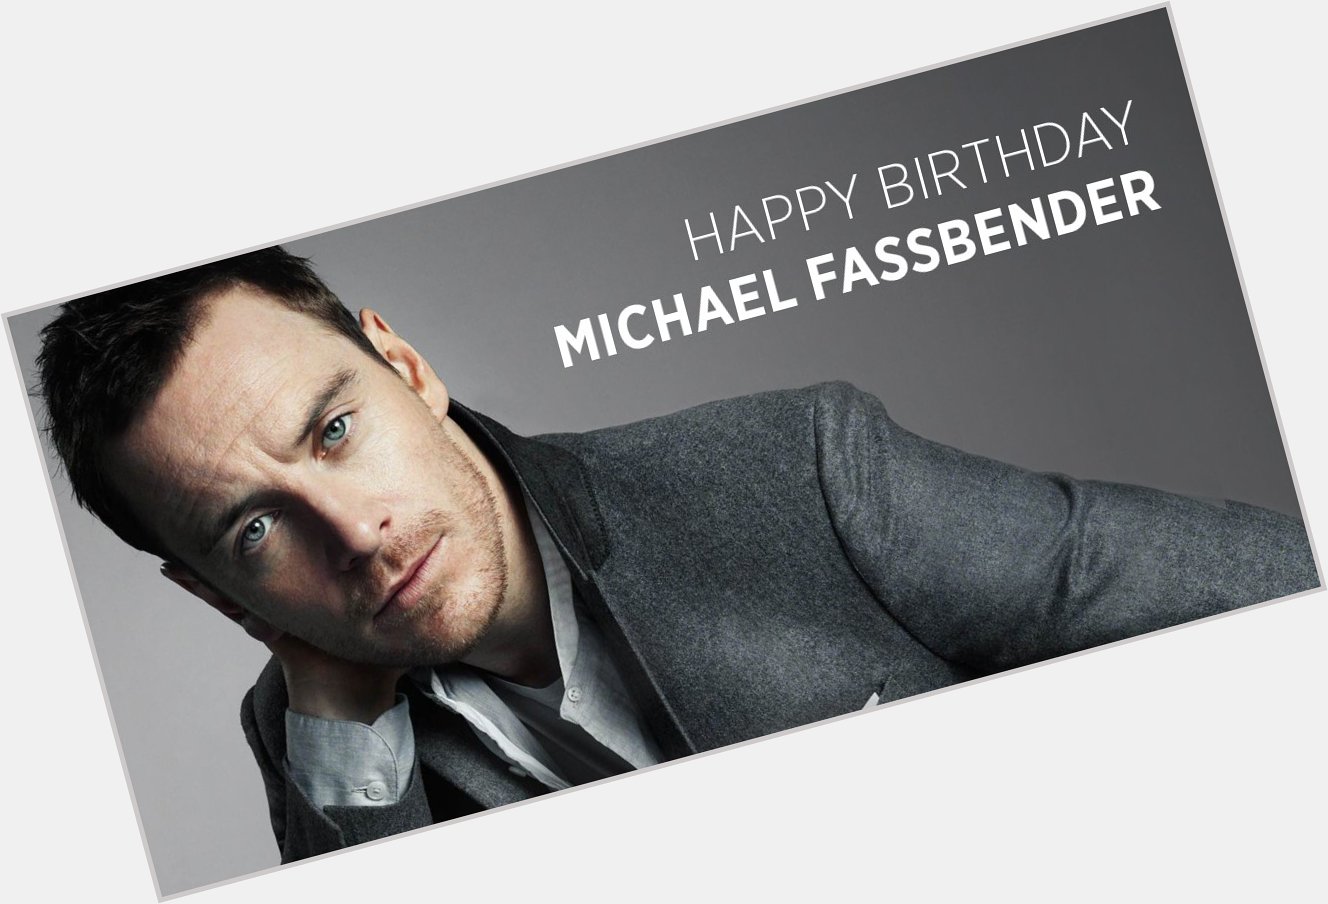 Happy Birthday Michael Fassbender! See him next in Terrence Malick\s upcoming film 